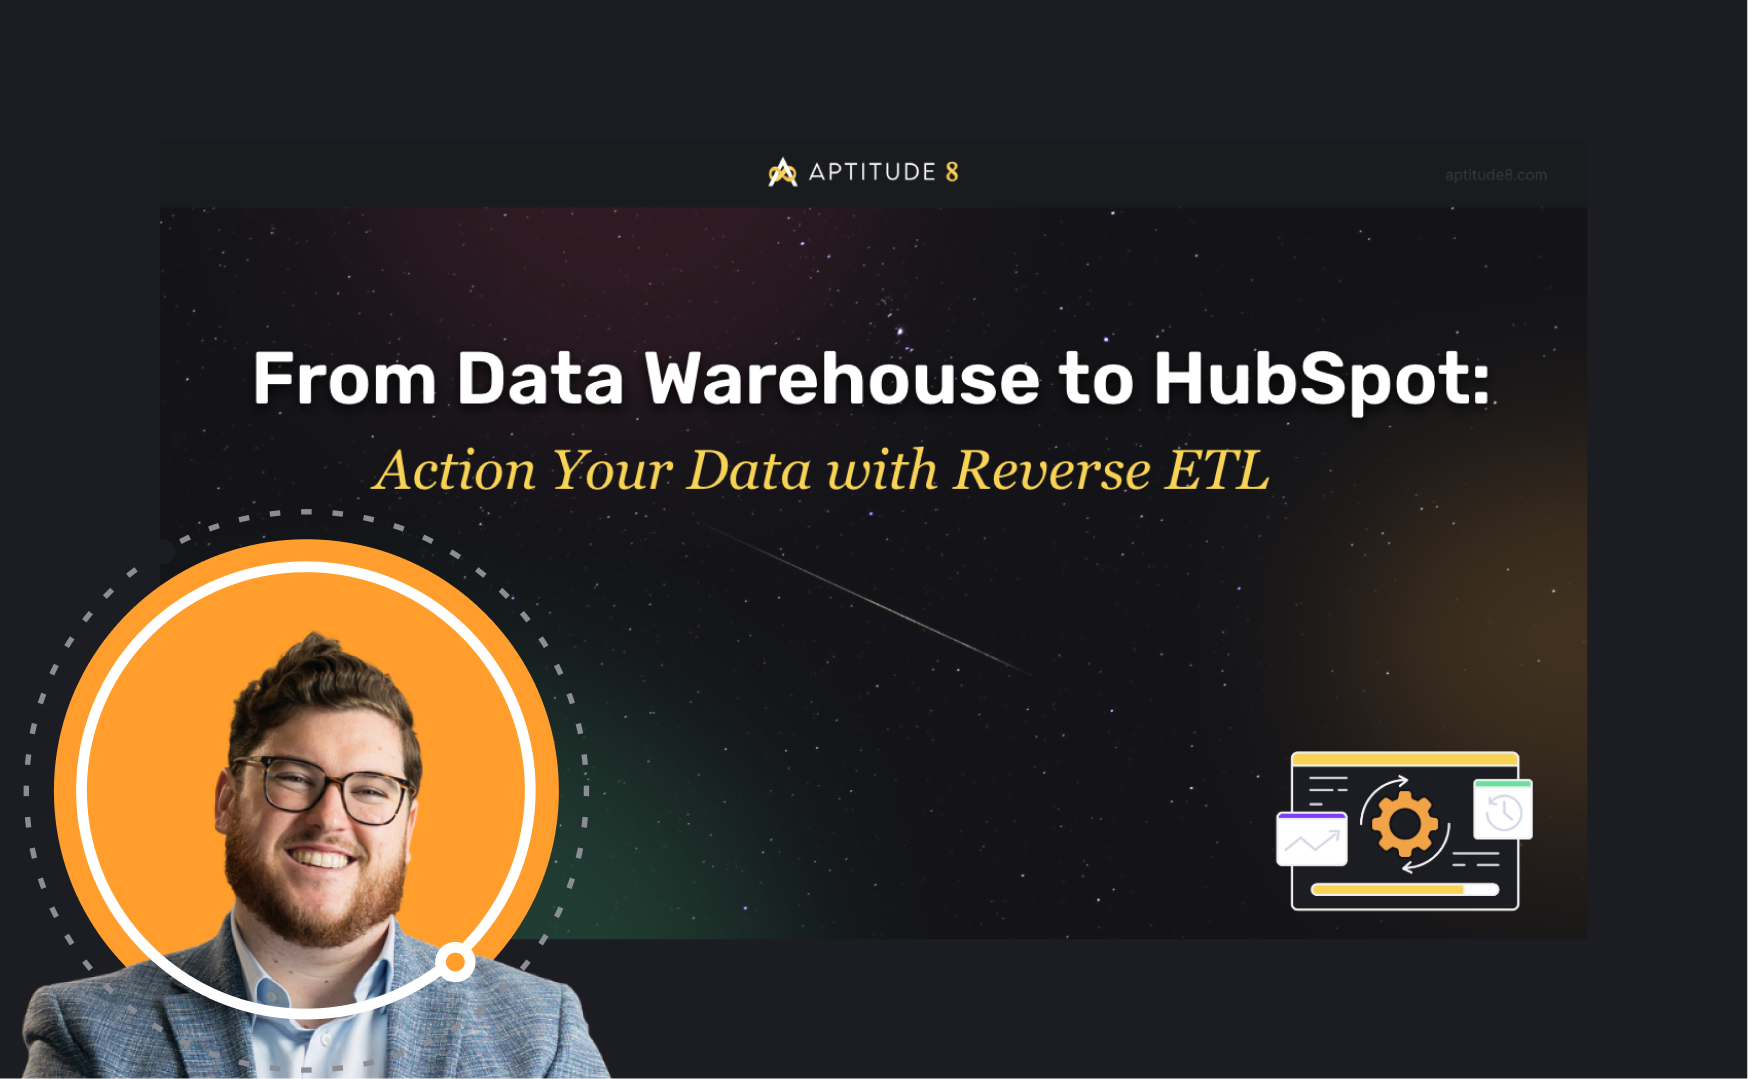 From Data Warehouse to HubSpot: Action Your Data With Reverse ETL